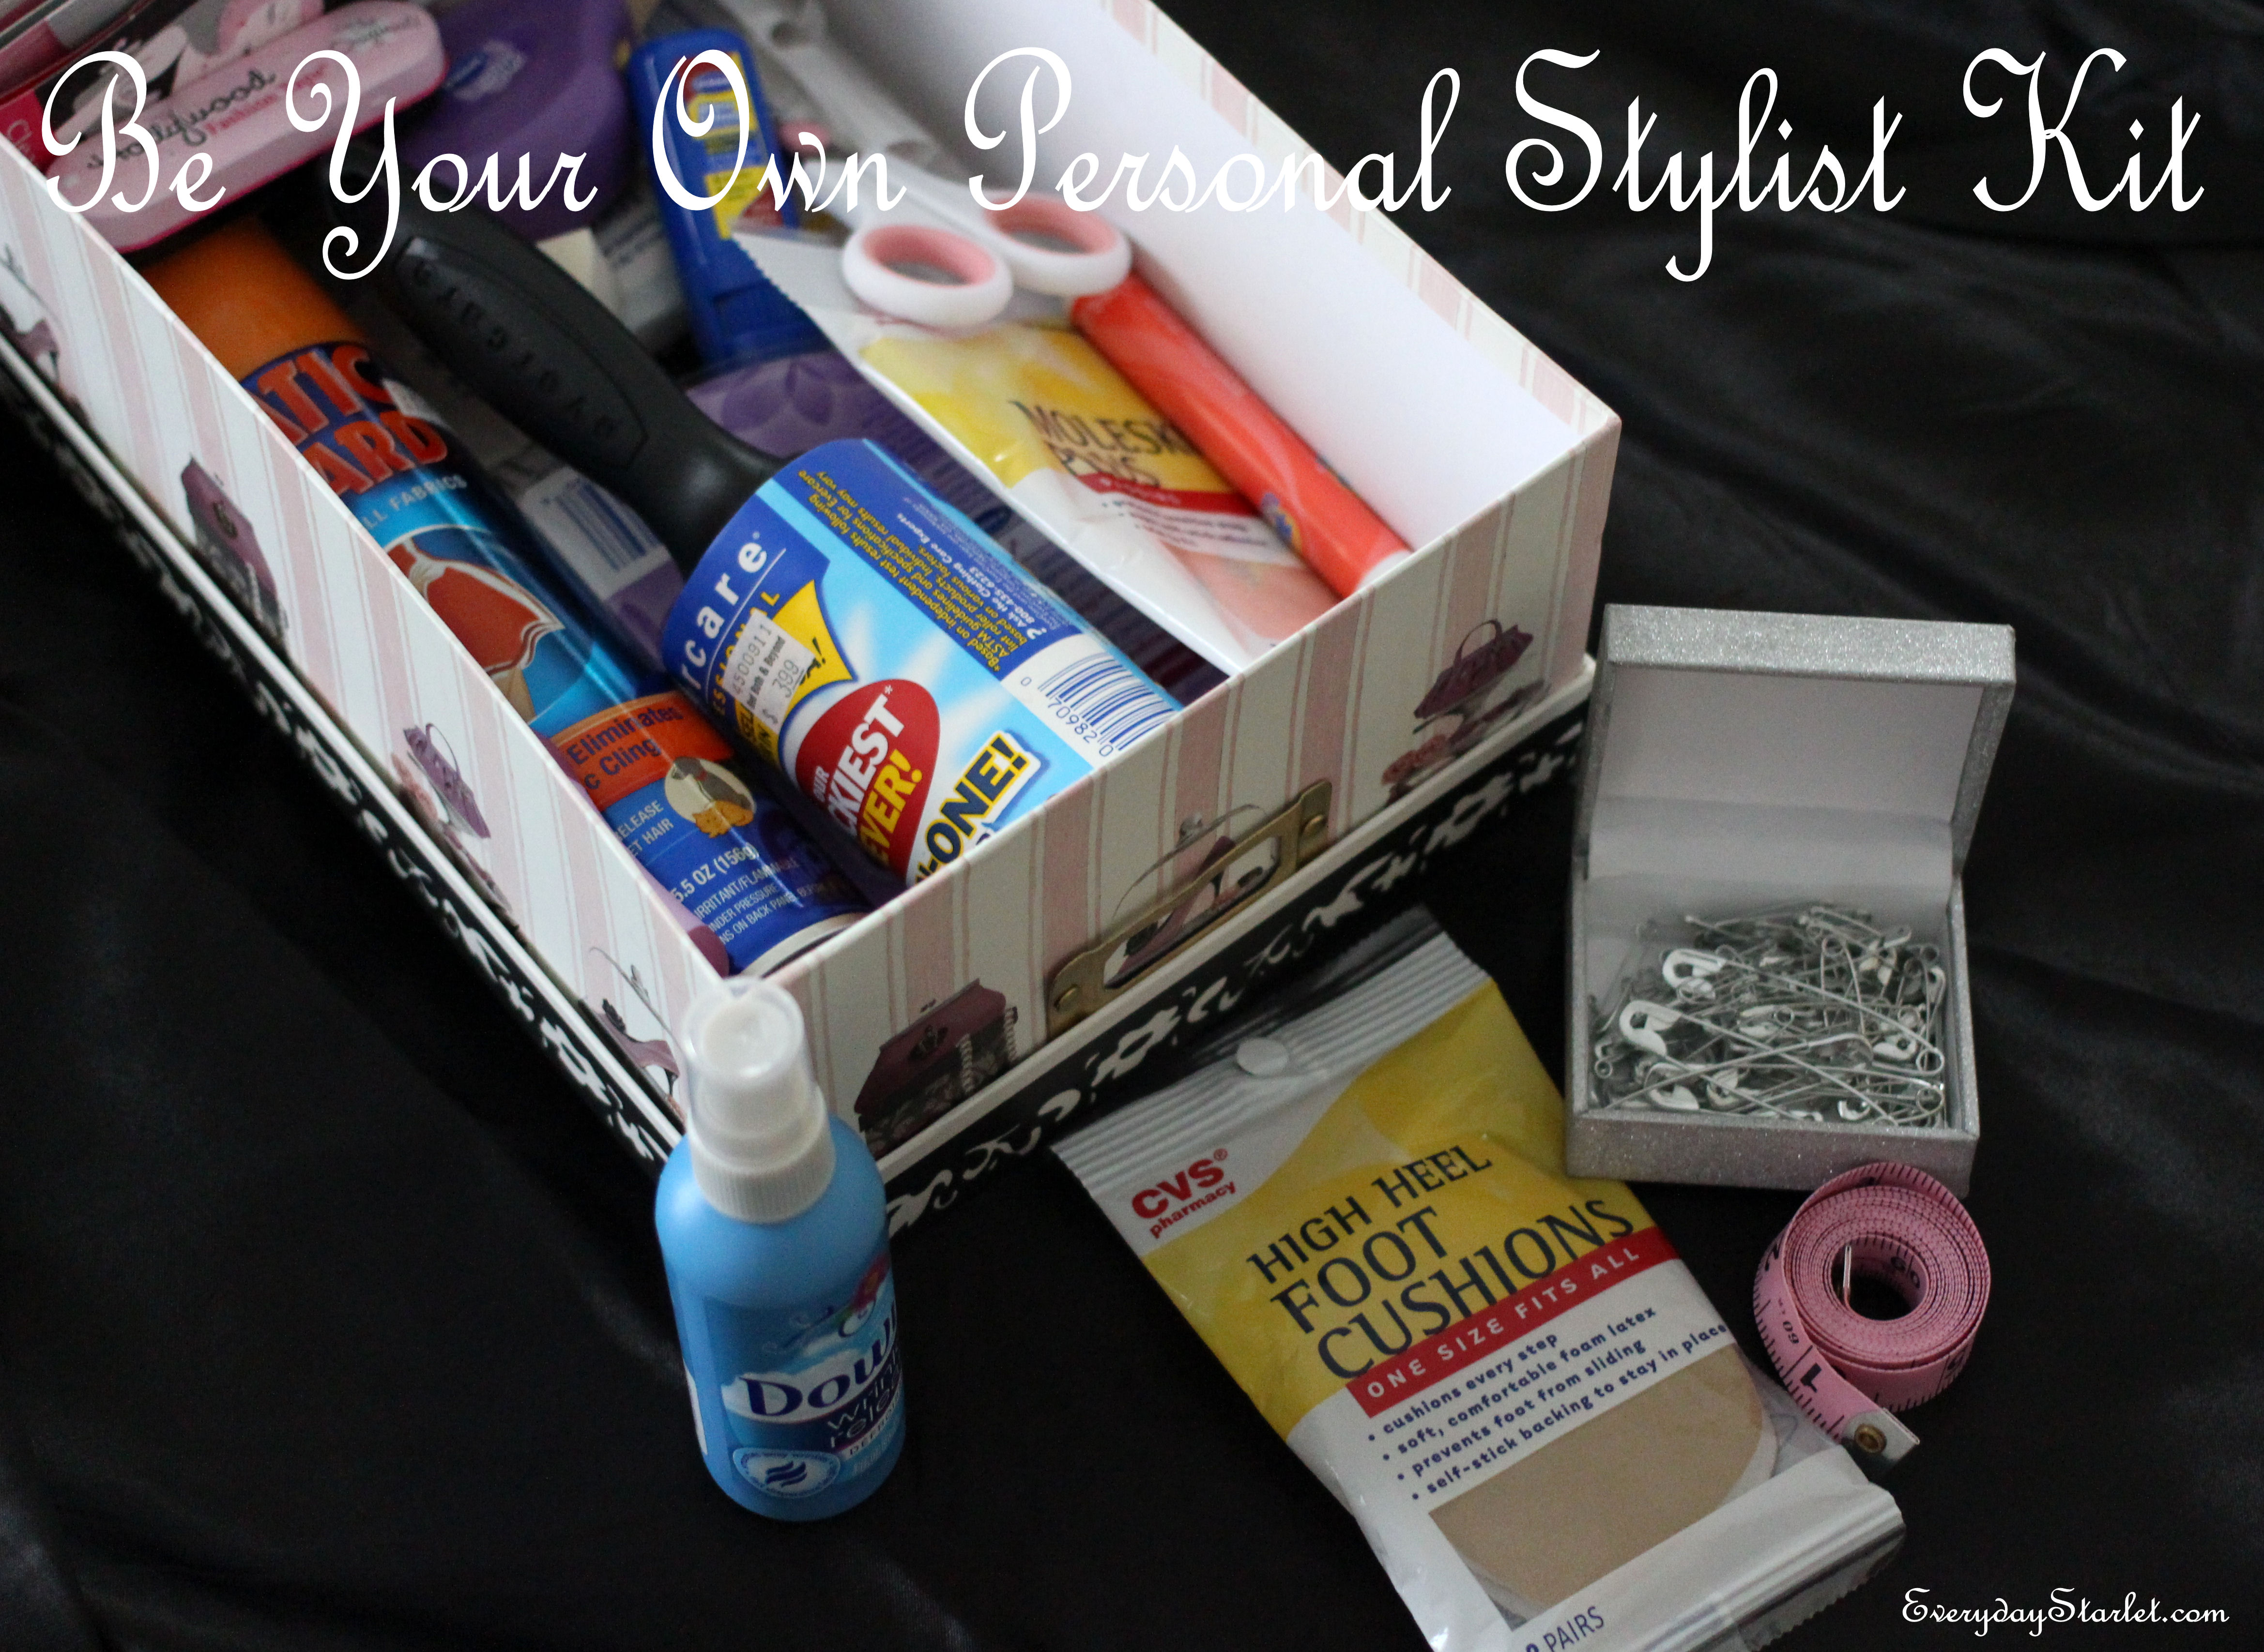 Be your own personal hollywood stylist kit